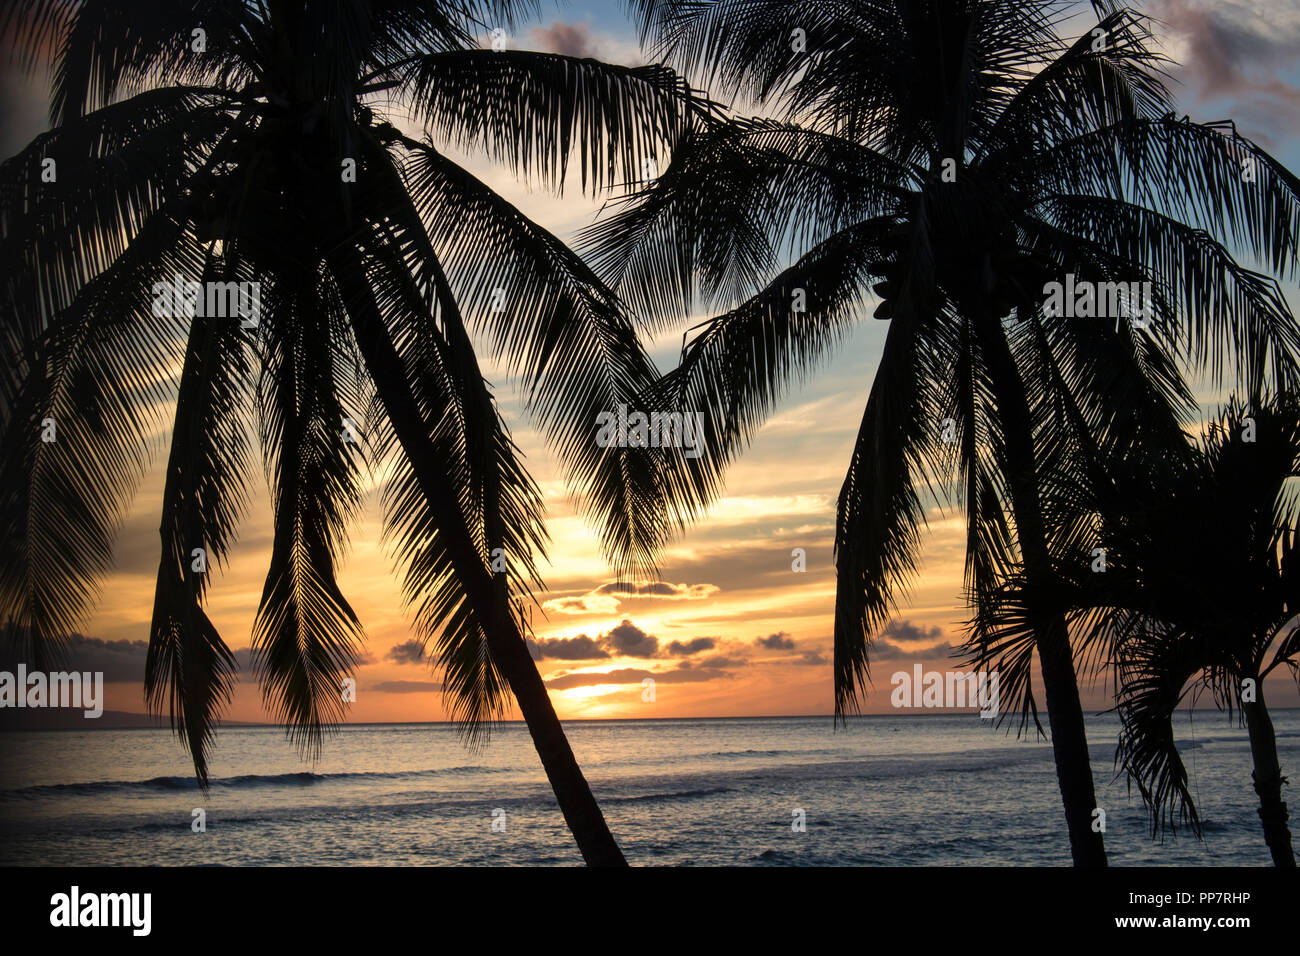 Palm Trees in Silhouette with Sunset over Ocean Stock Photo